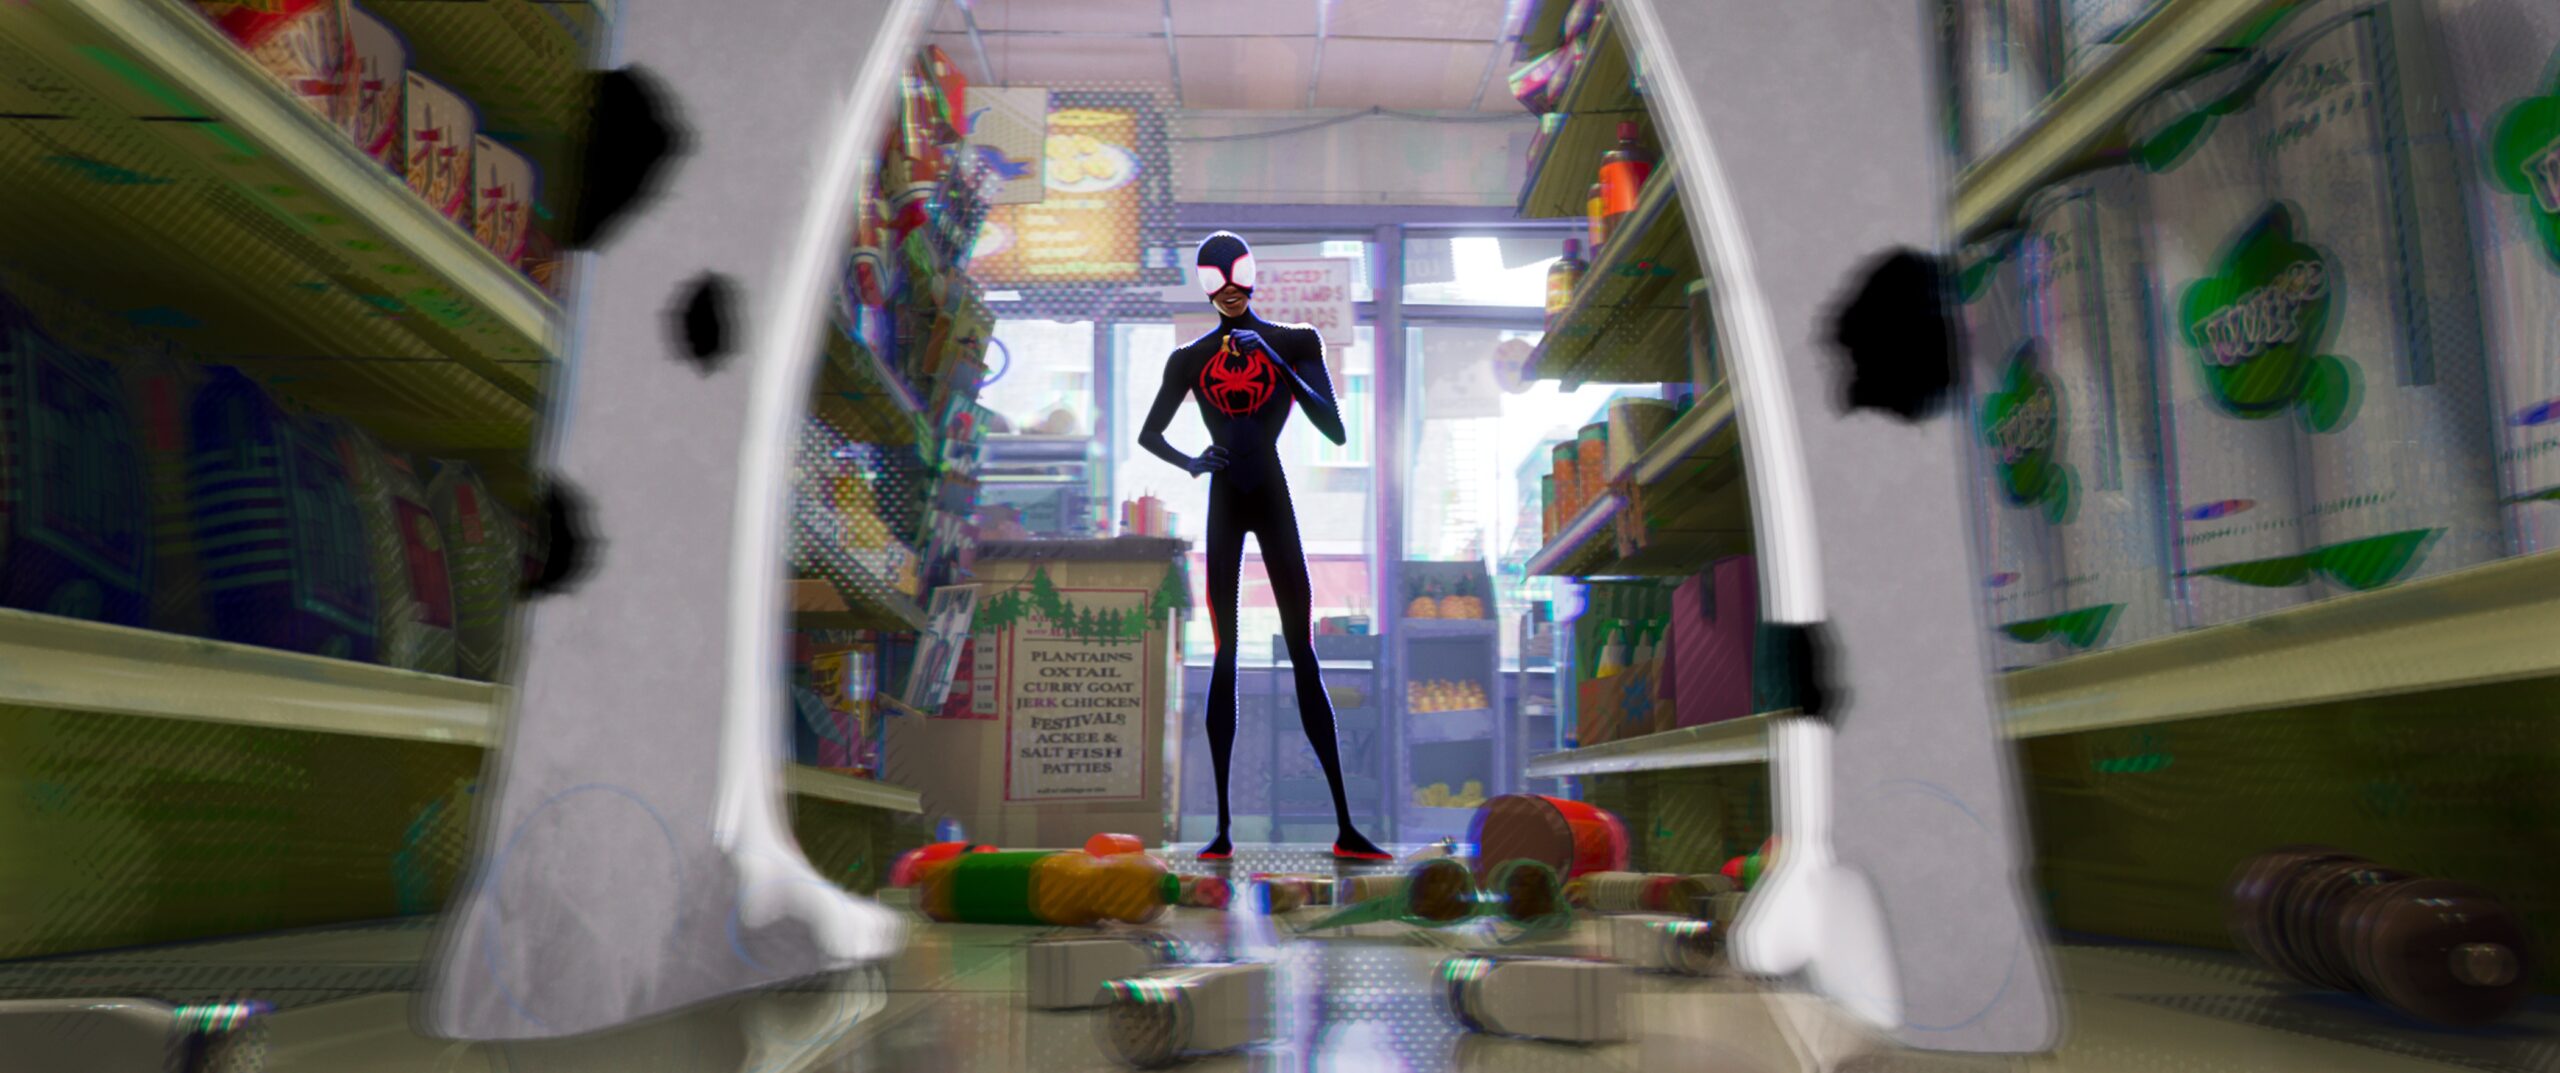 Let's Talk About the Across the Spider-Verse Cliffhanger End